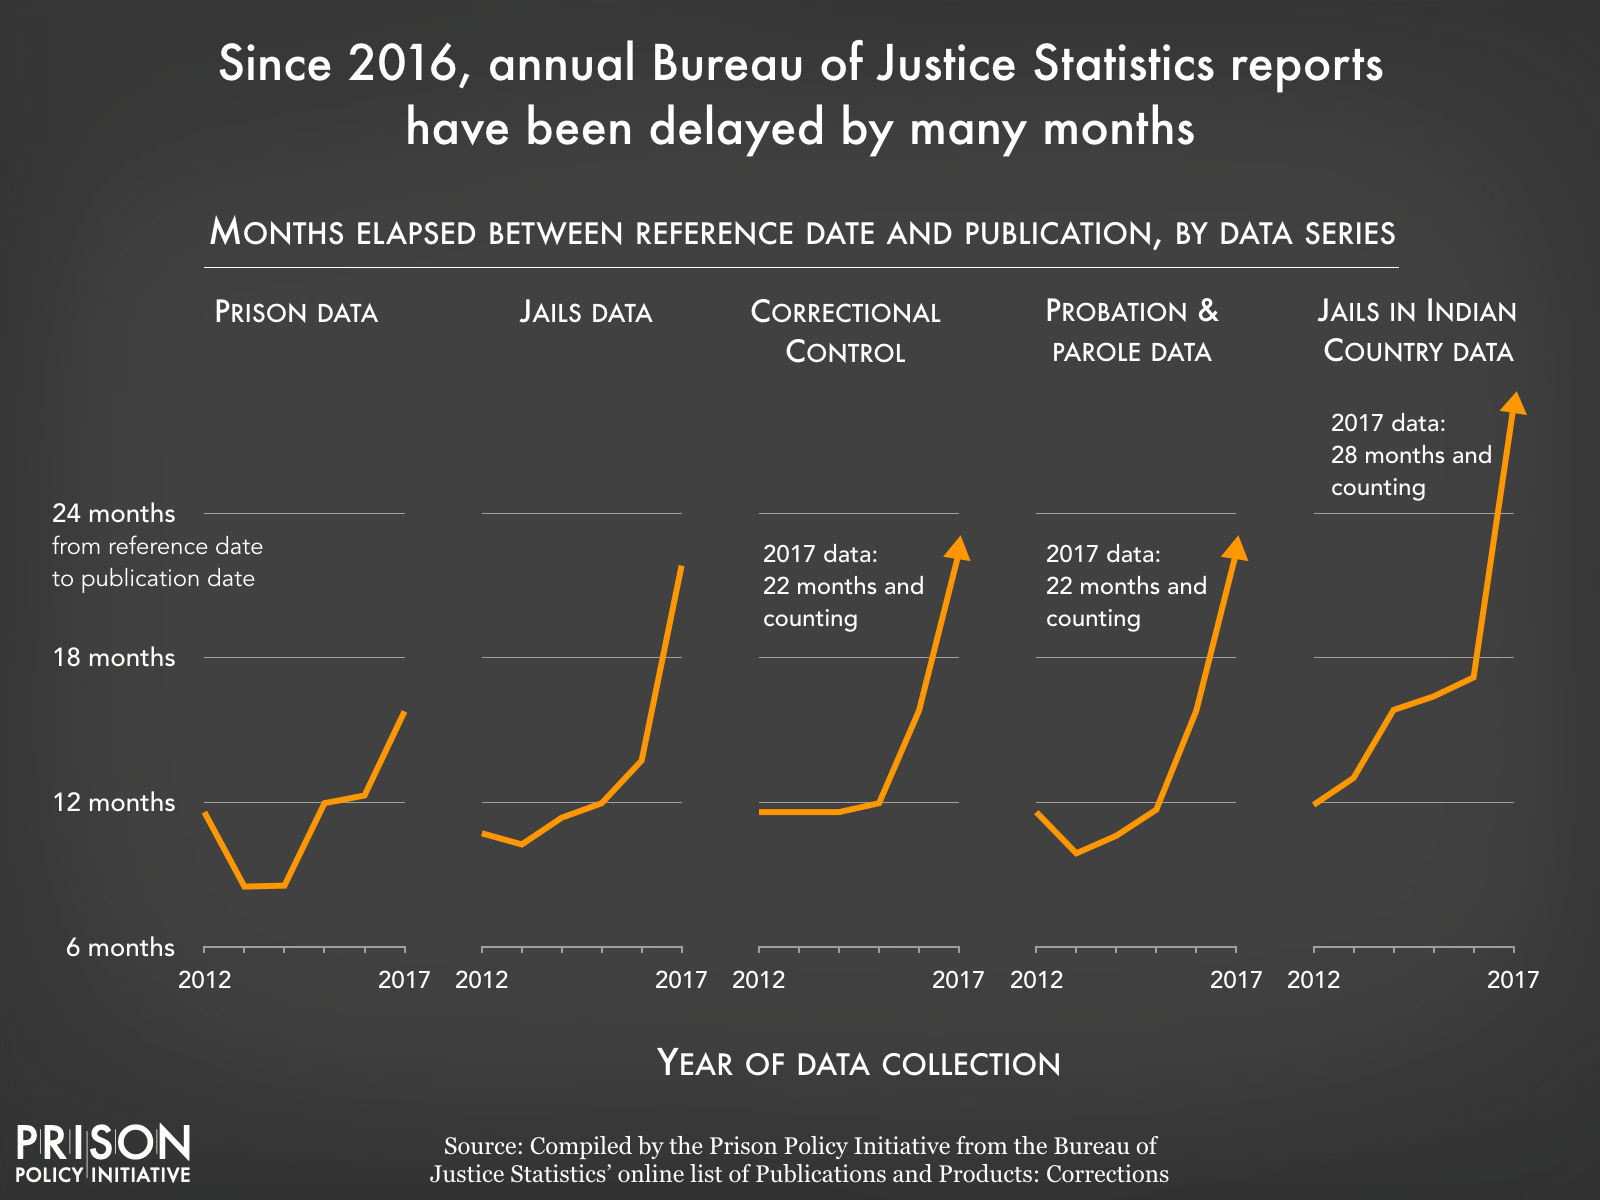 Graph showing that since 2016, BJS data reports have been delayed by many months.